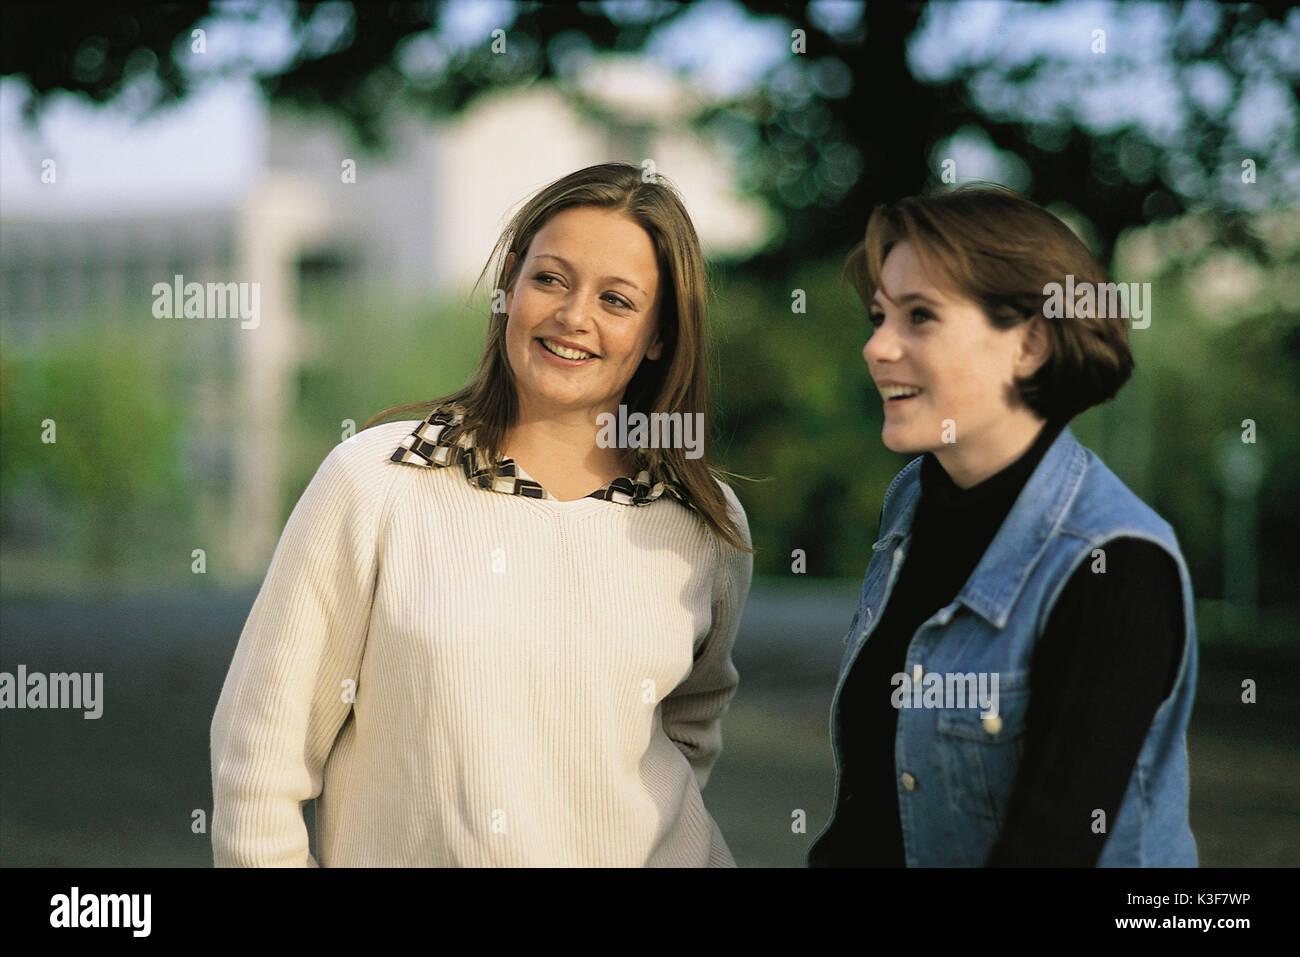 Two girls / teenager at the conversation Stock Photo